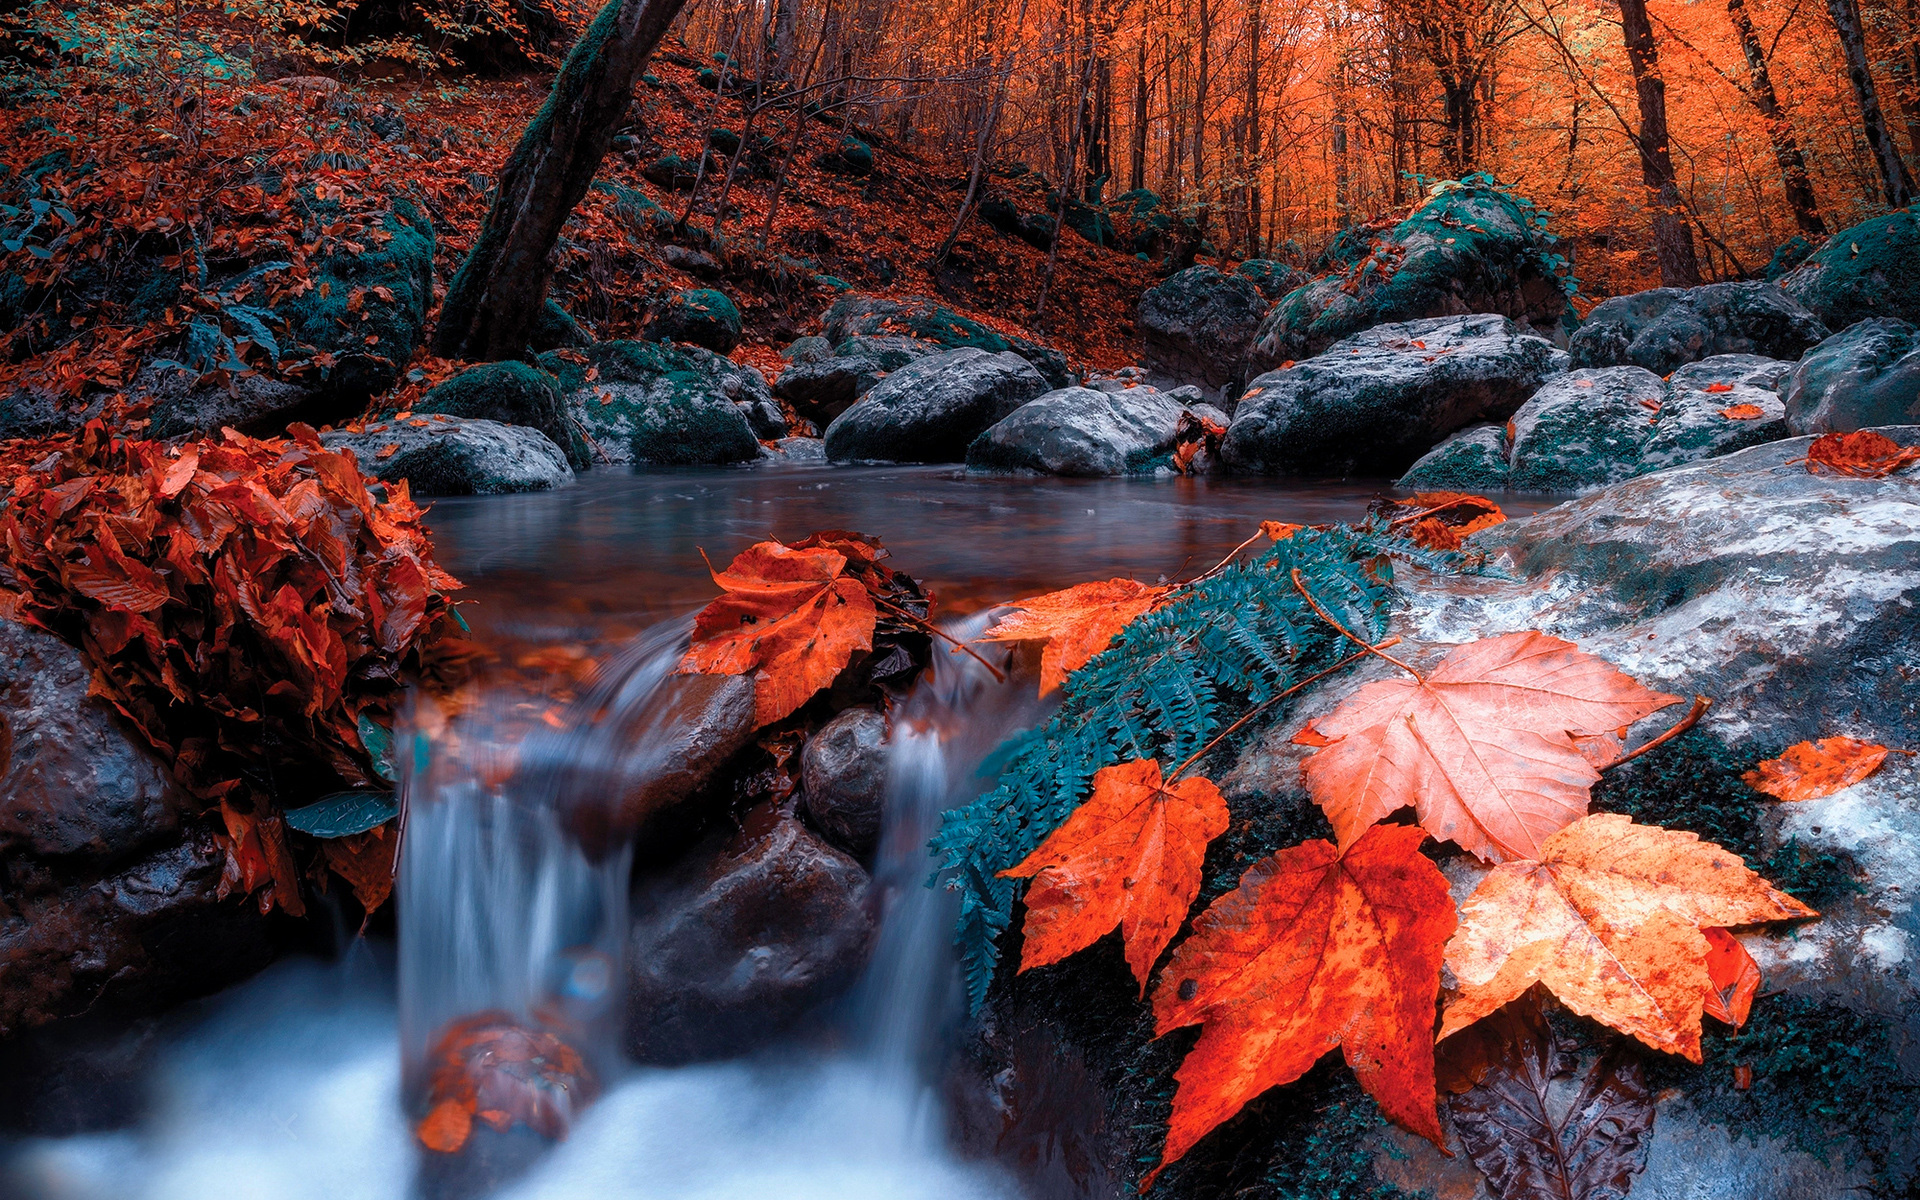 Download wallpaper creek, autumn, forest, red leaves